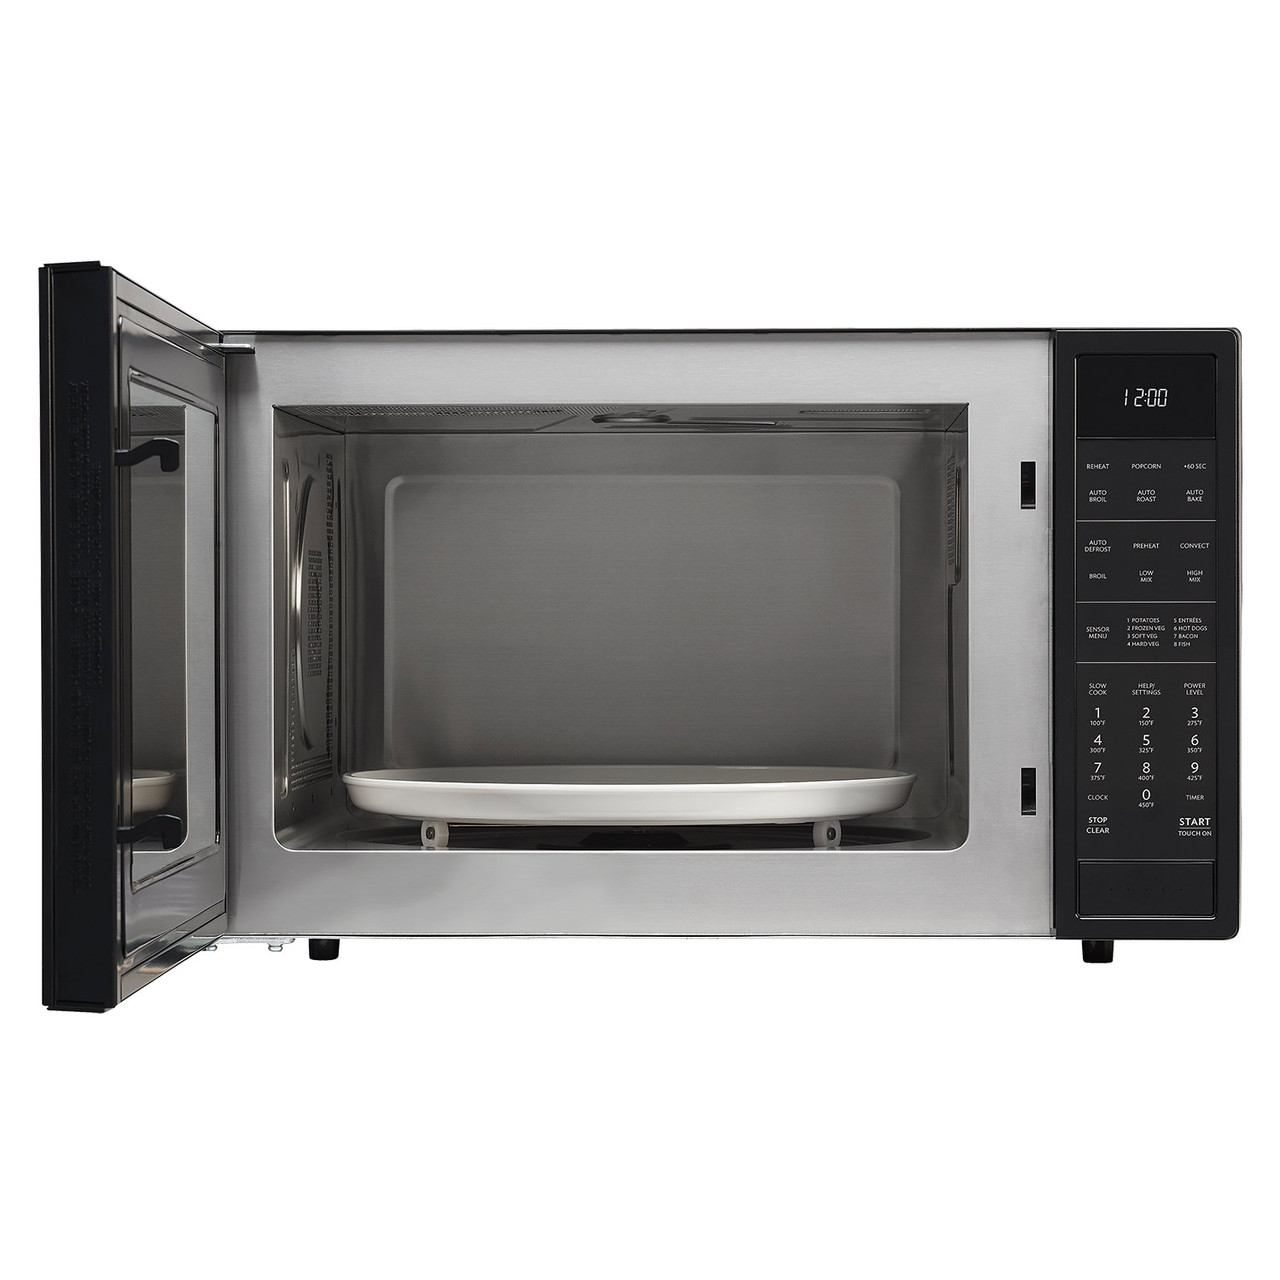 1.5 cu. ft. Sharp Black Carousel Convection Microwave (SMC1585BB) – front view with door open